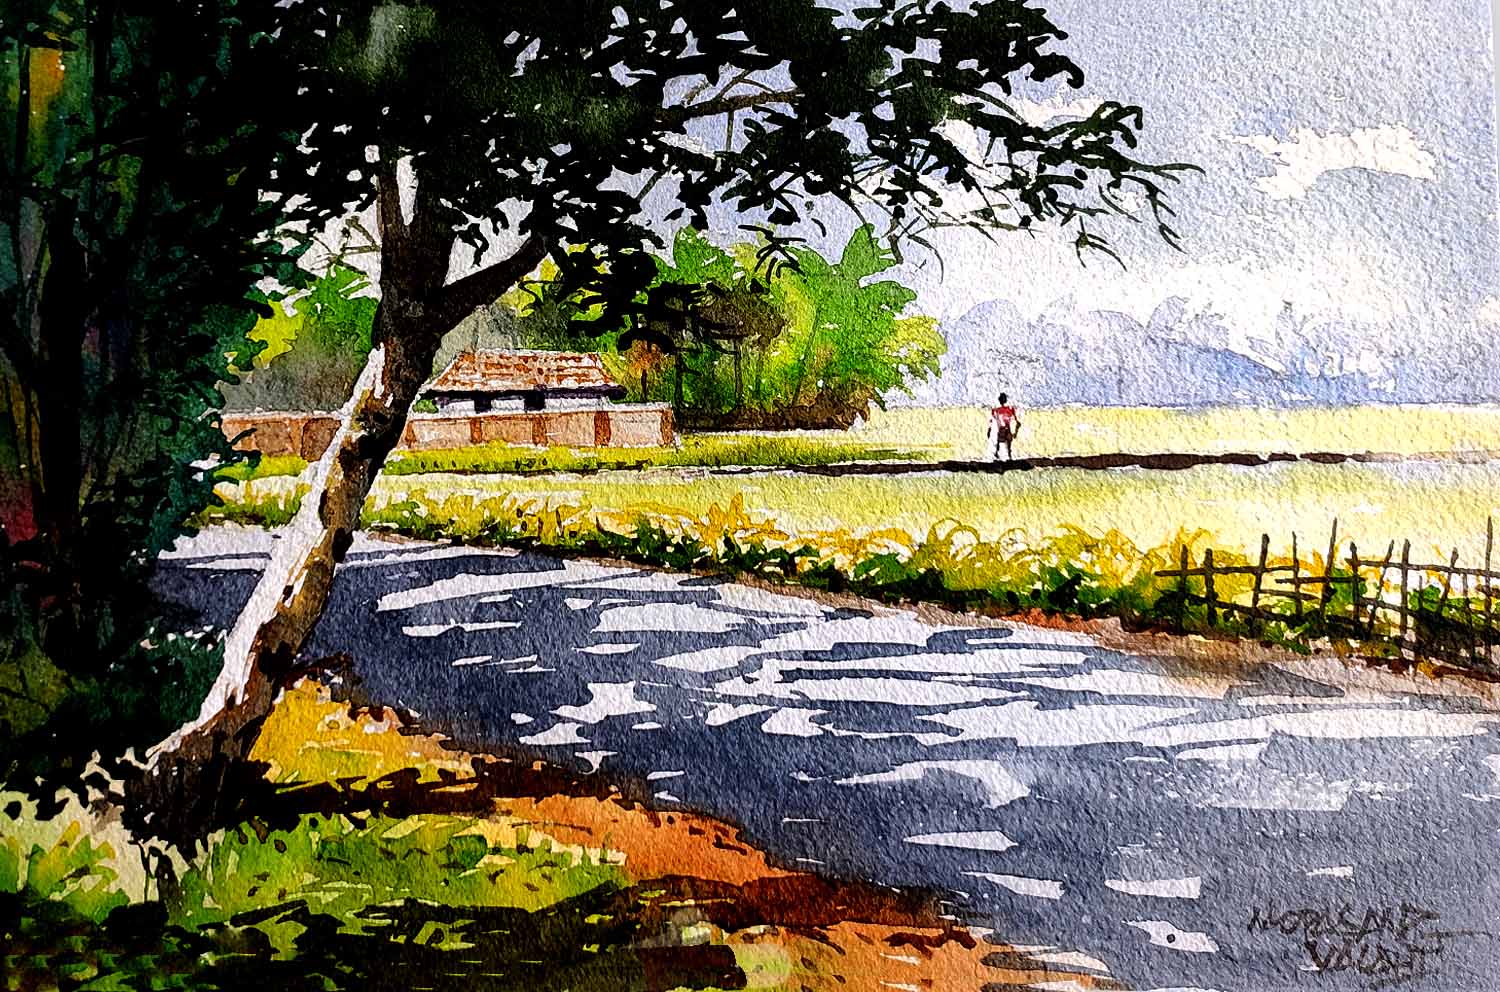 Watercolor painting on the enchanting beauty of kerala landscape.